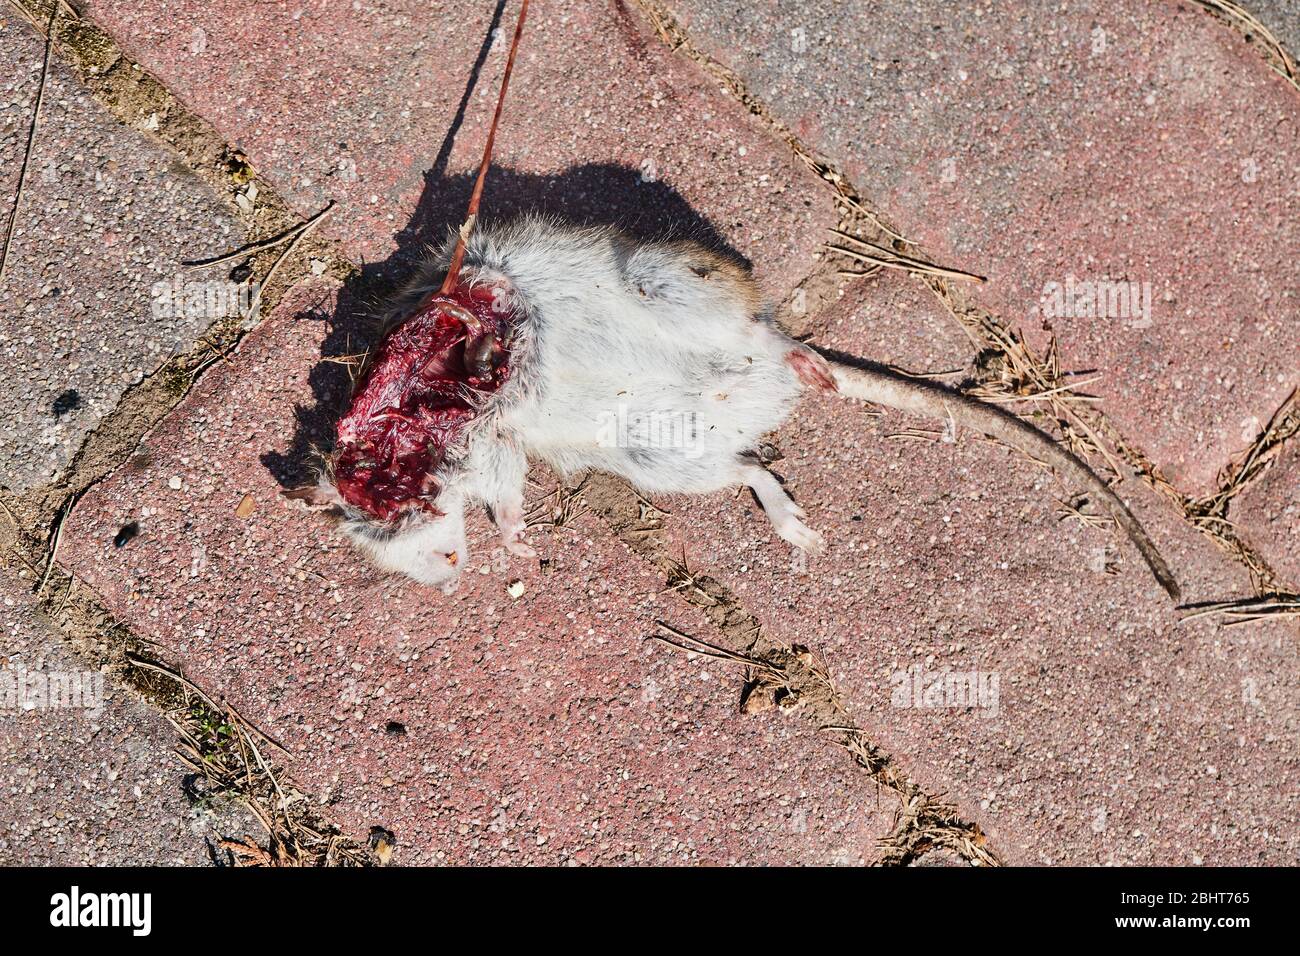 Dead mouse open fleshy wound Stock Photo